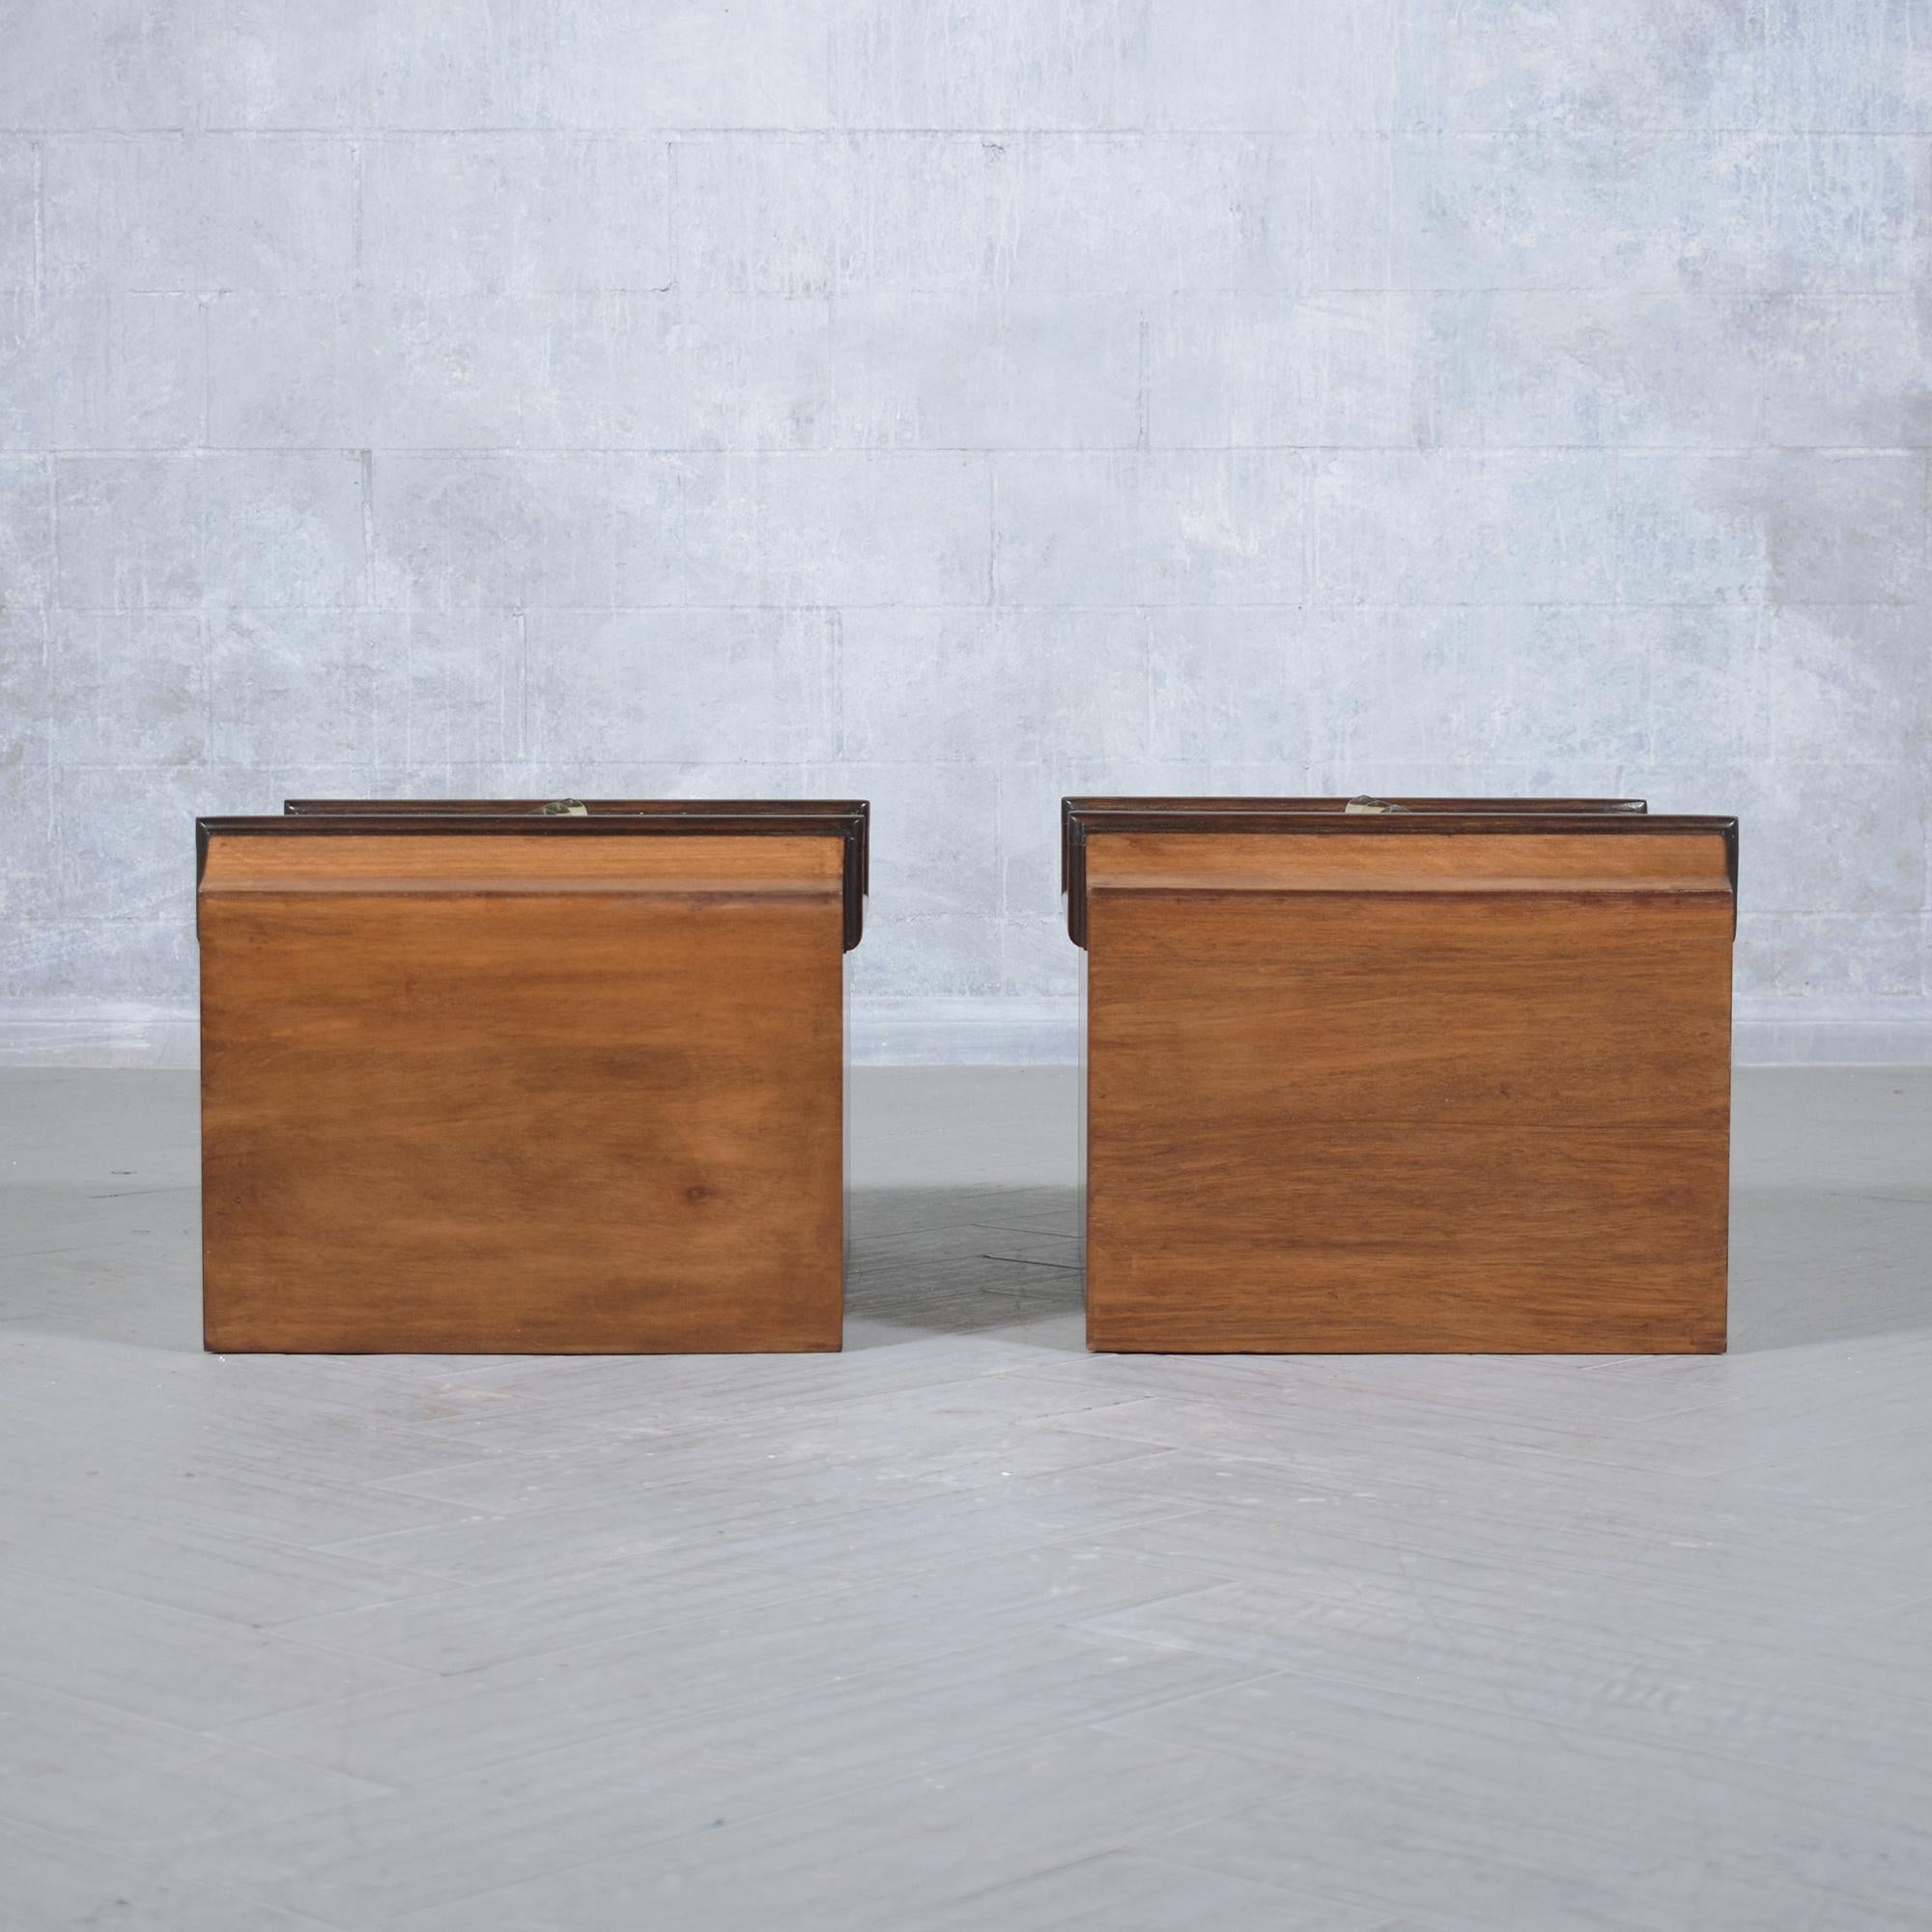 1960s Mid-Century Modern Walnut Nightstands - A Timeless Pair Restored For Sale 3